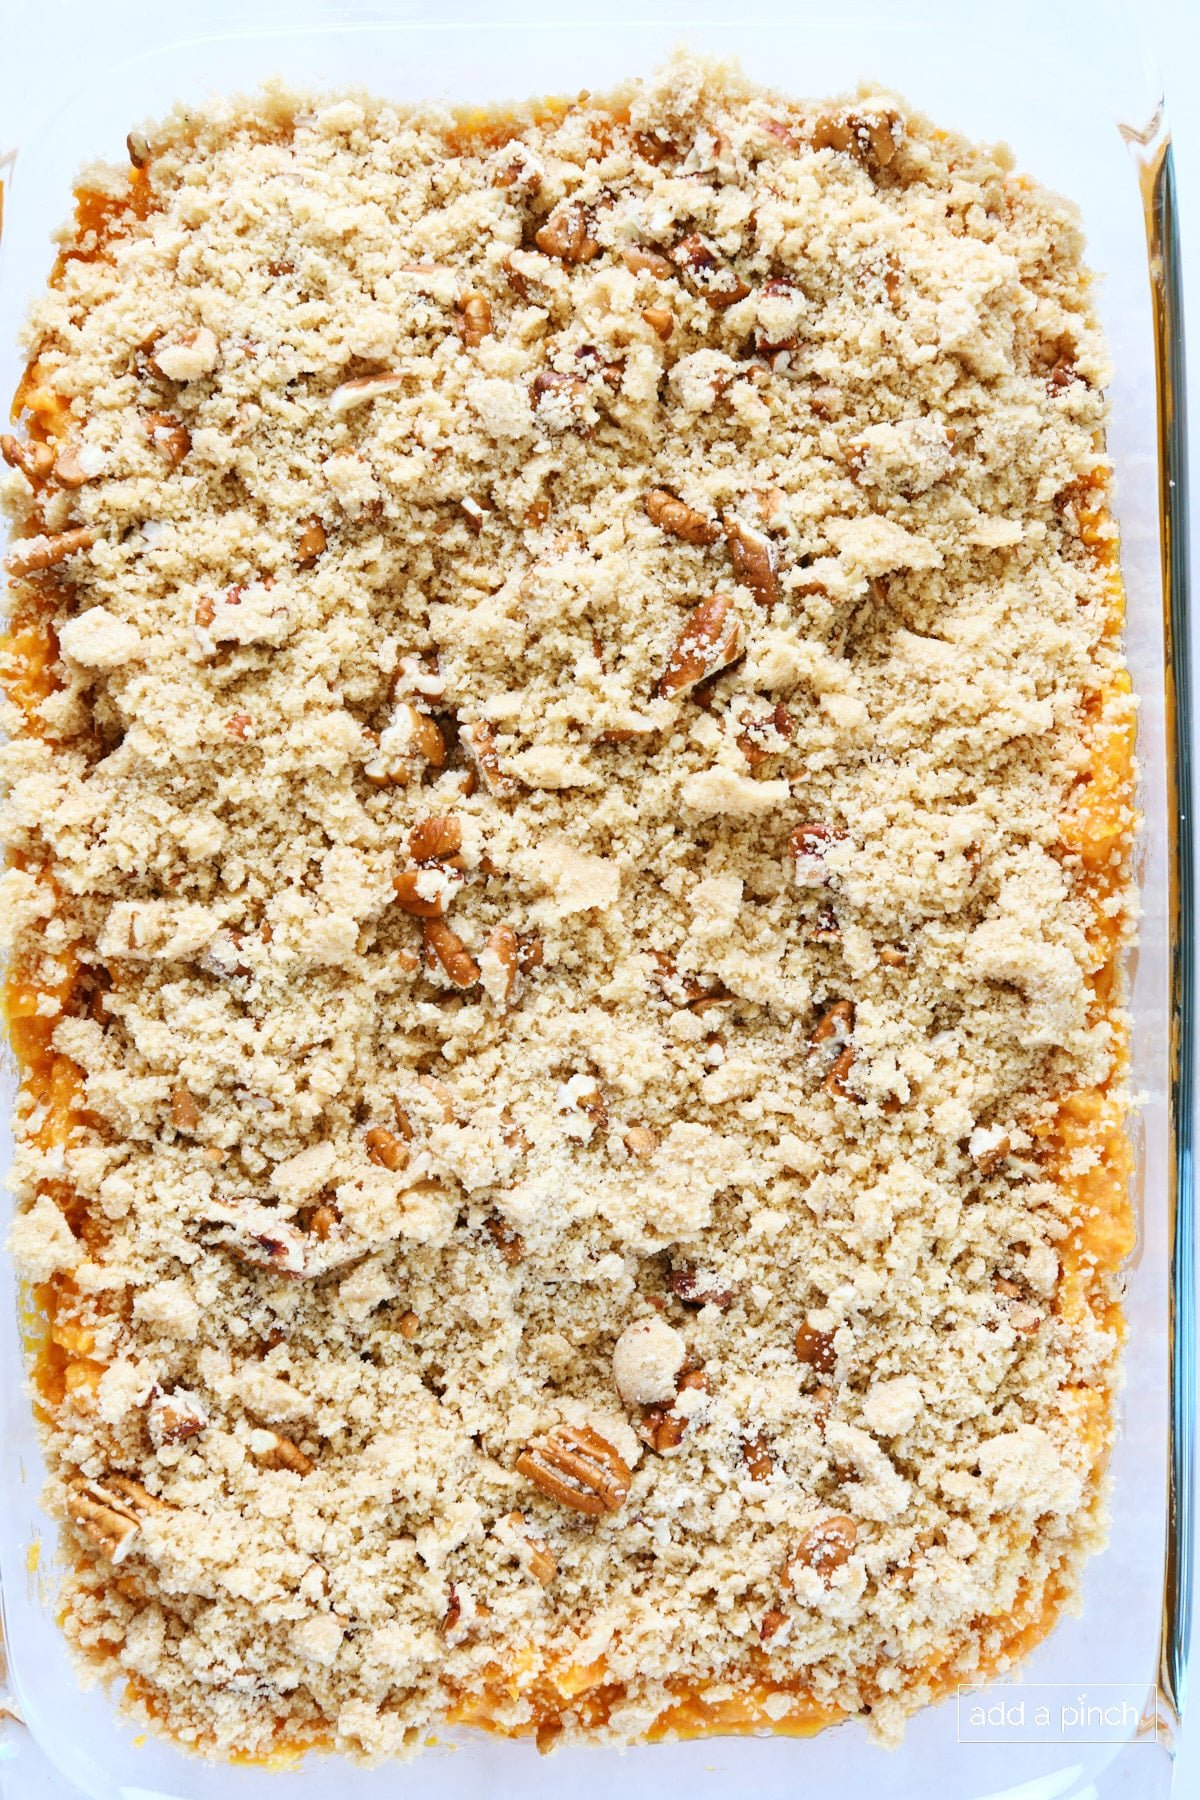 Crumble topping spread on top of an unbaked casserole in a baking dish.